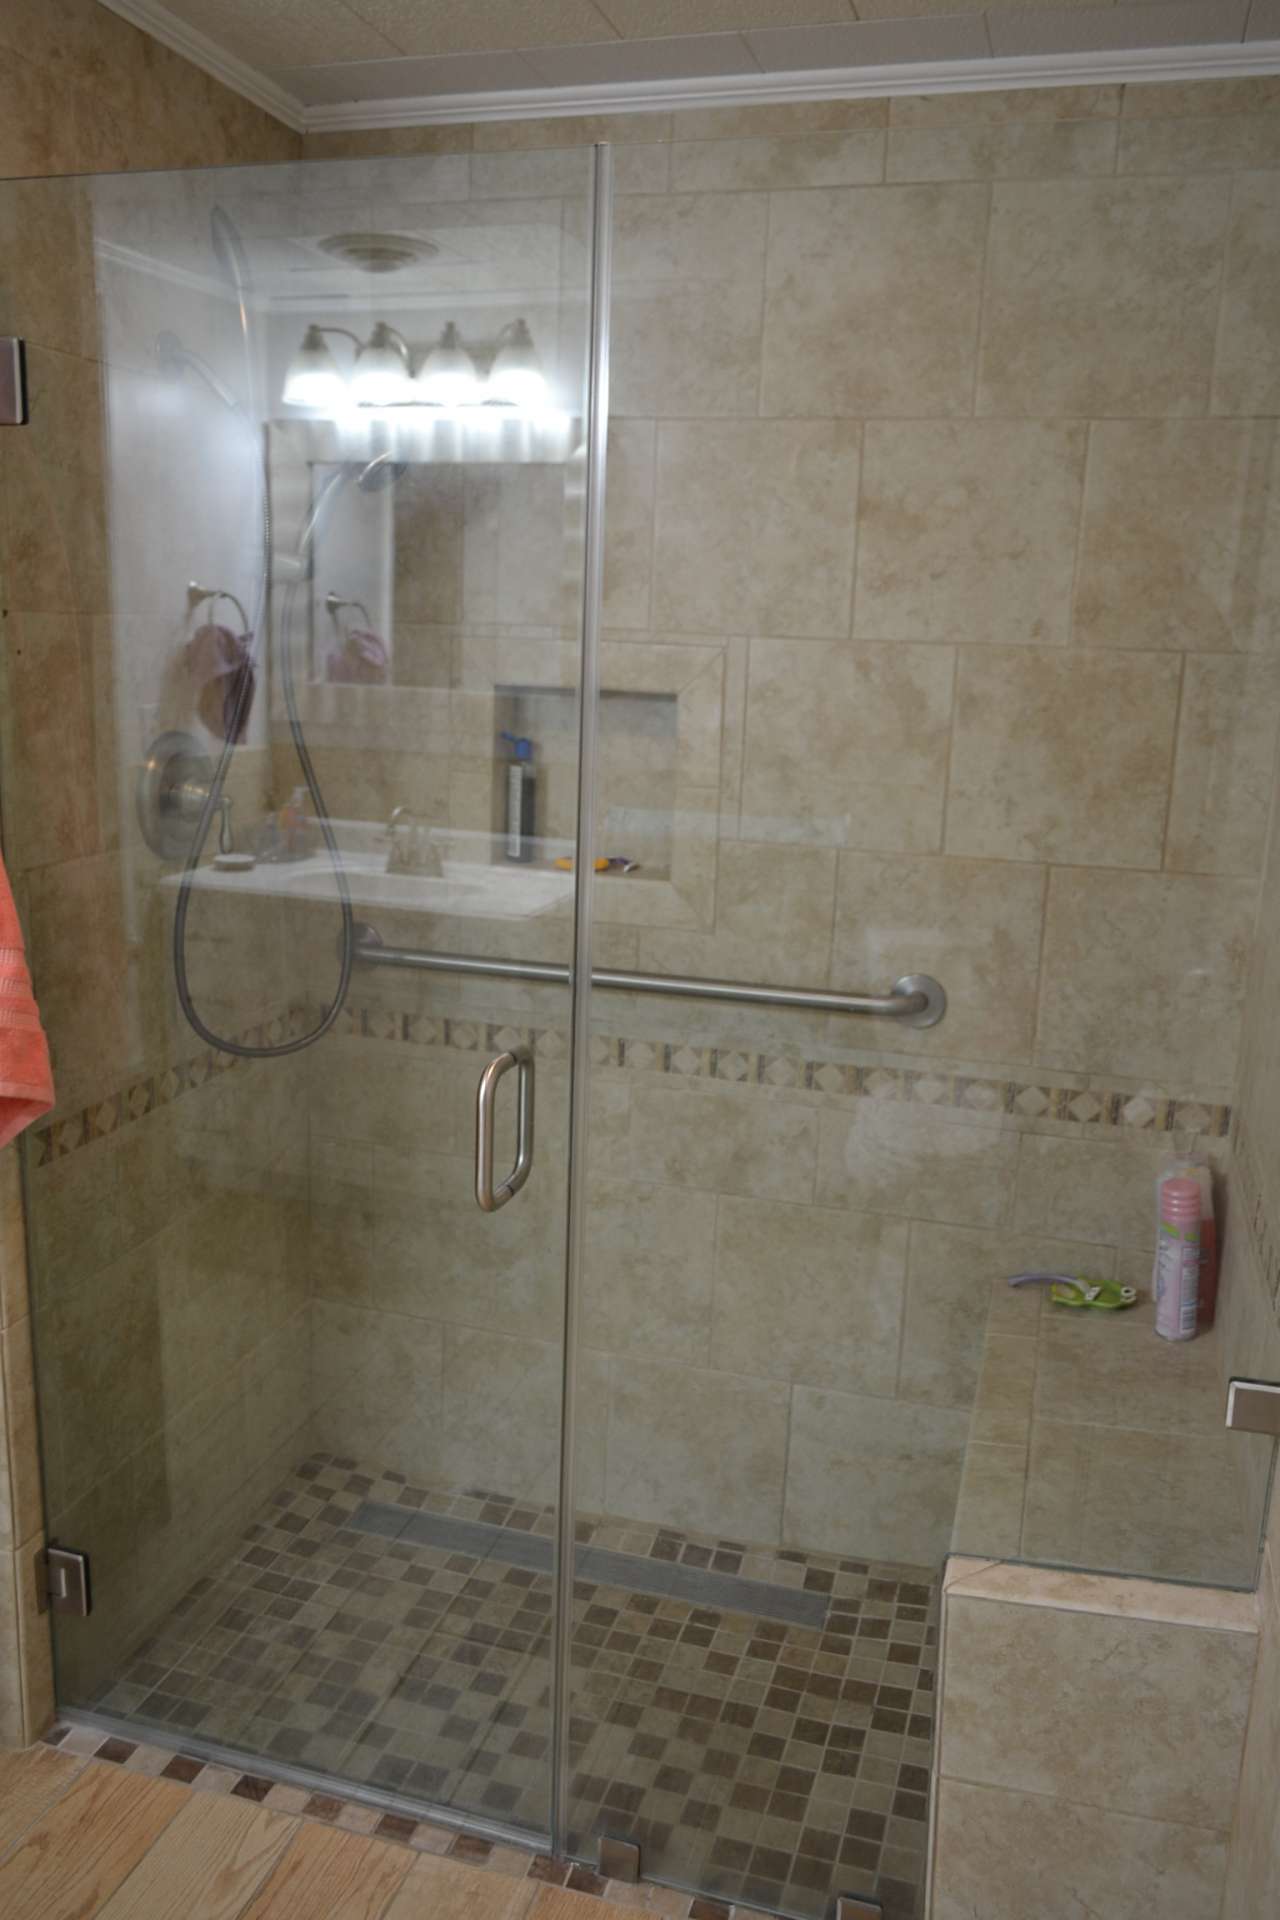 Newly upgraded tiled walk-in shower.